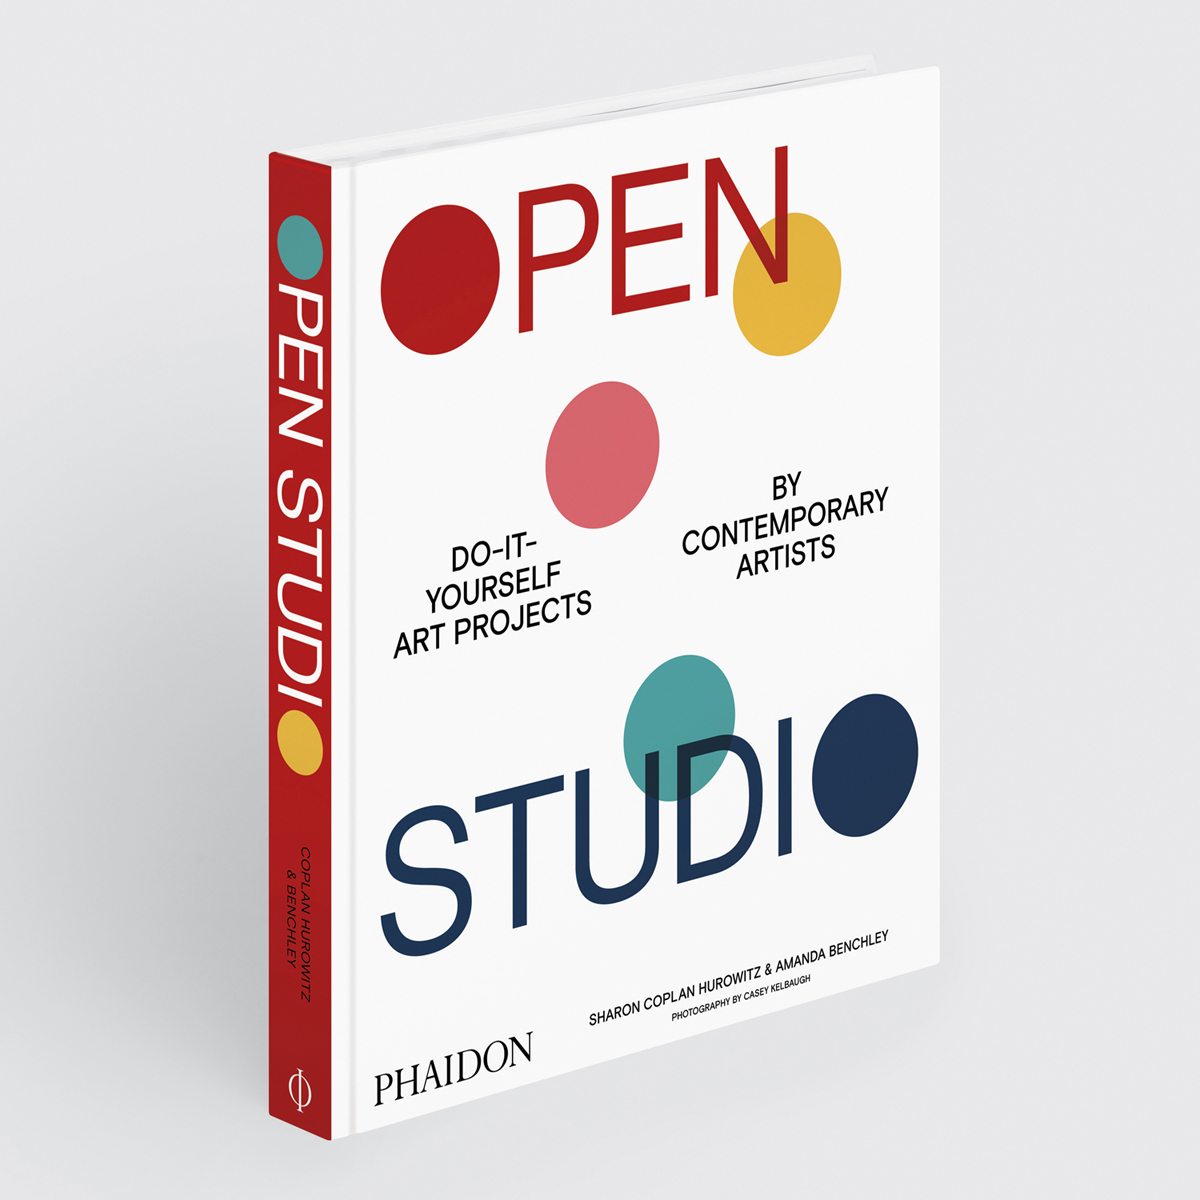 Open Studio: Do-It-Yourself Art Projects by Contemporary Artists, by Sharon Coplan Hurowitz & Amanda Benchley, photography by Casey Kelbaugh, Phaidon.